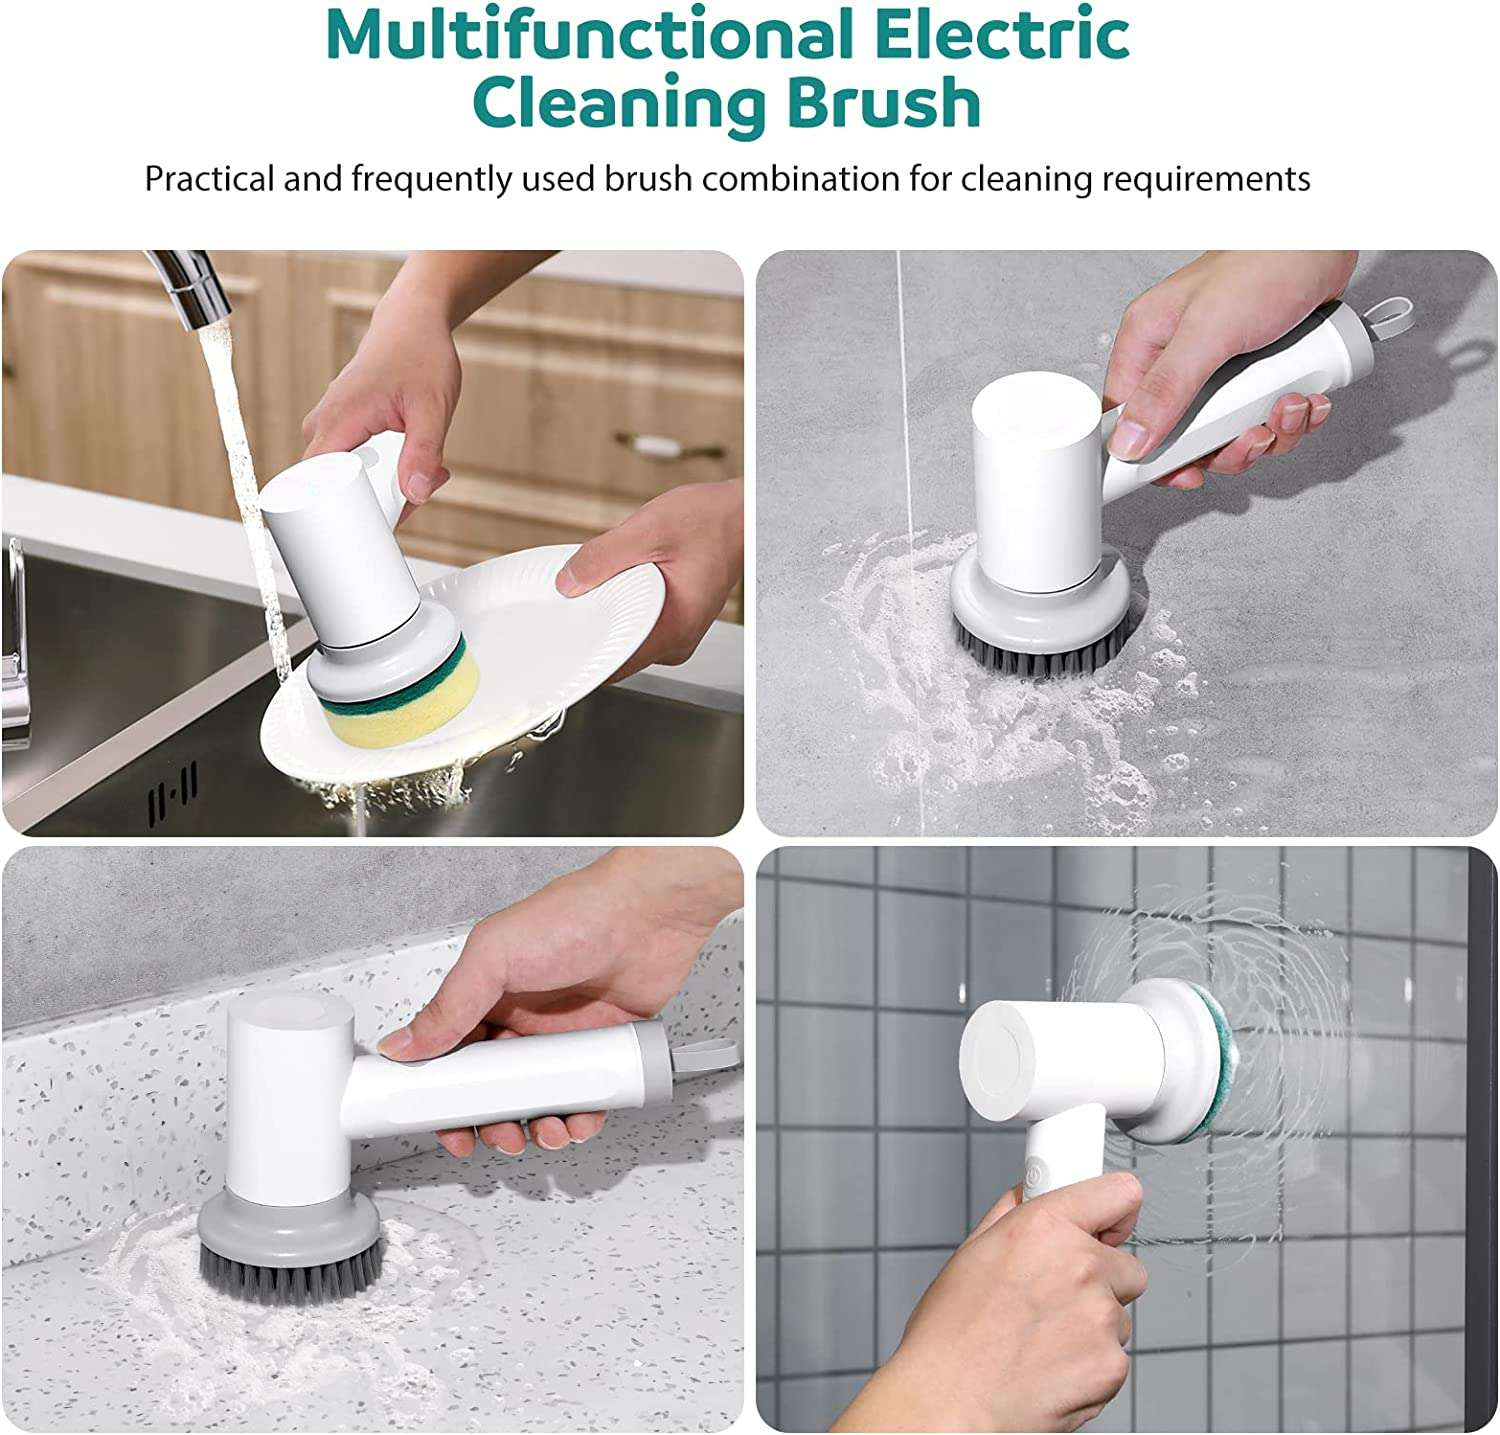 5 in 1 Handheld Multifunction Electric Cleaning Brush Wireless